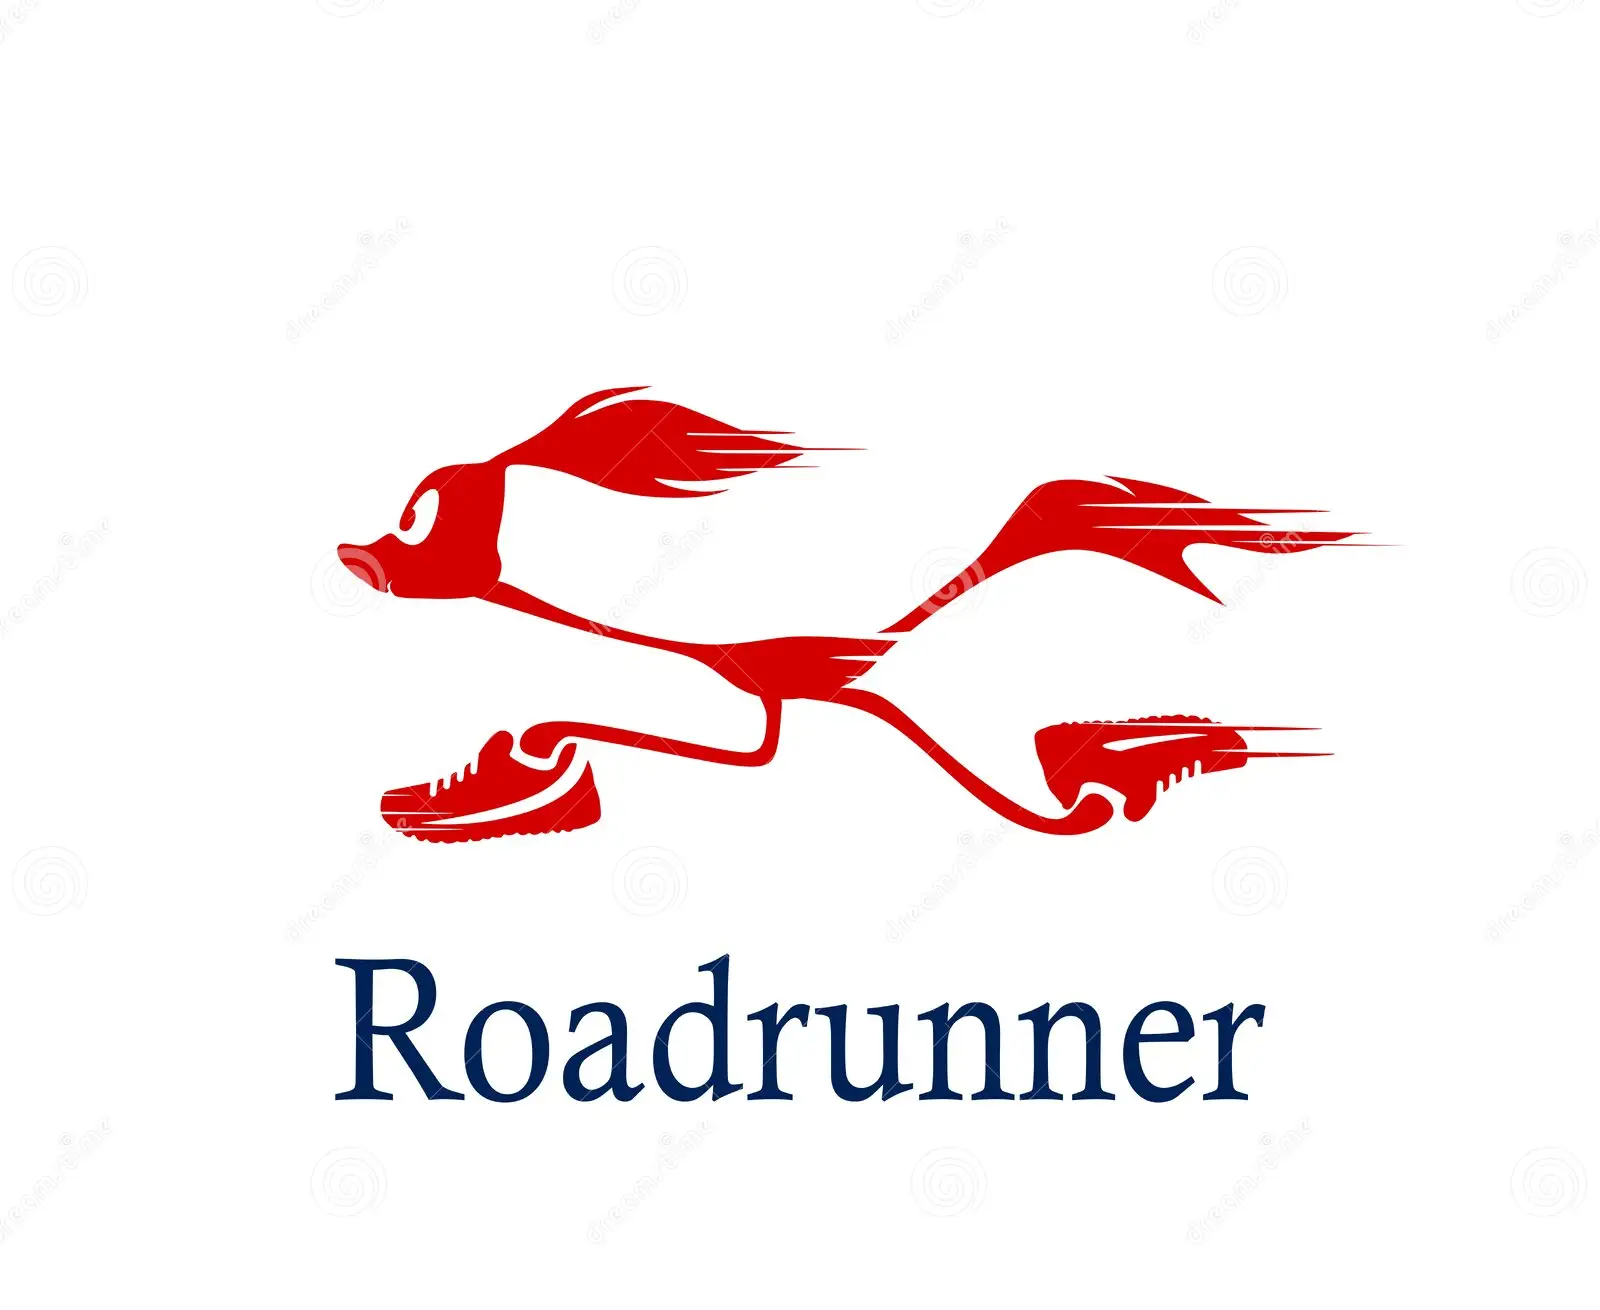 Finding Roadrunner Mail Not Functioning on a Mac